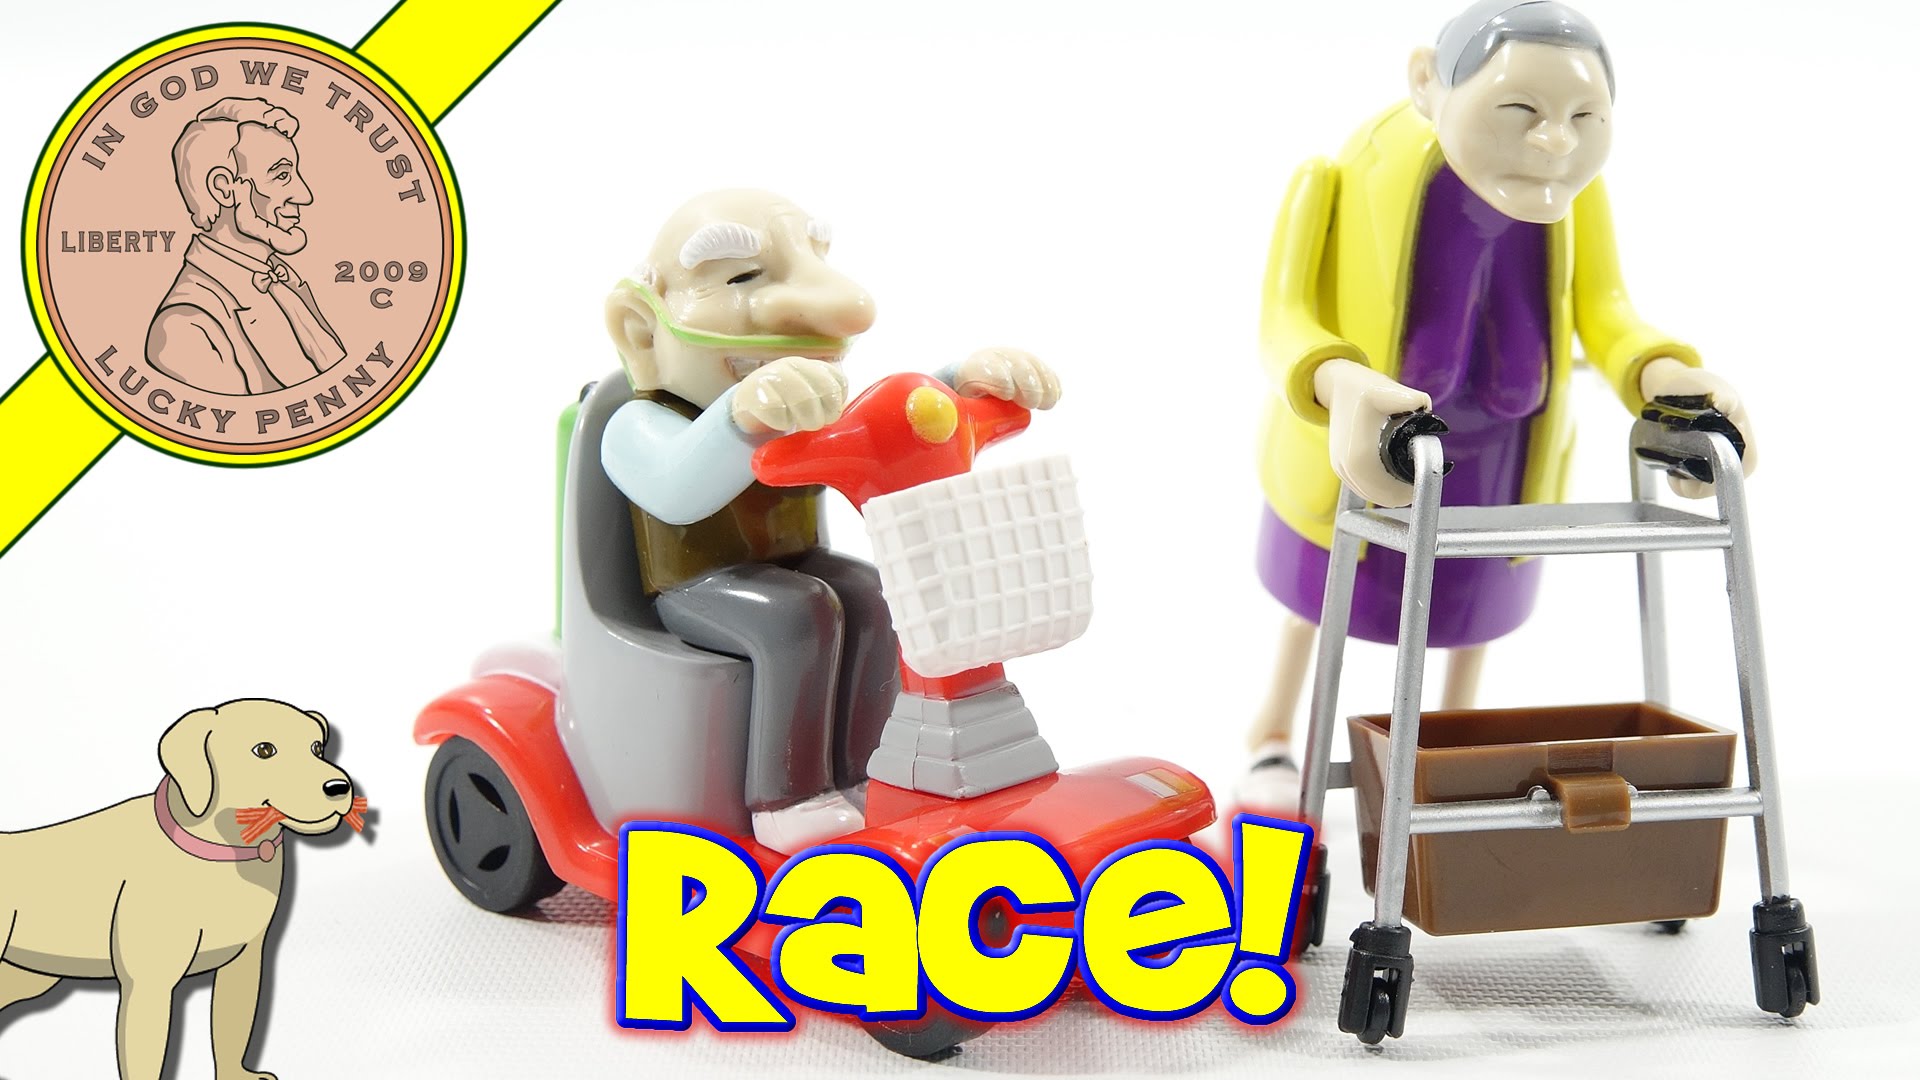 Racing Granny & Grandad Novelty Wind Up Toy, Who Wins! - YouTube